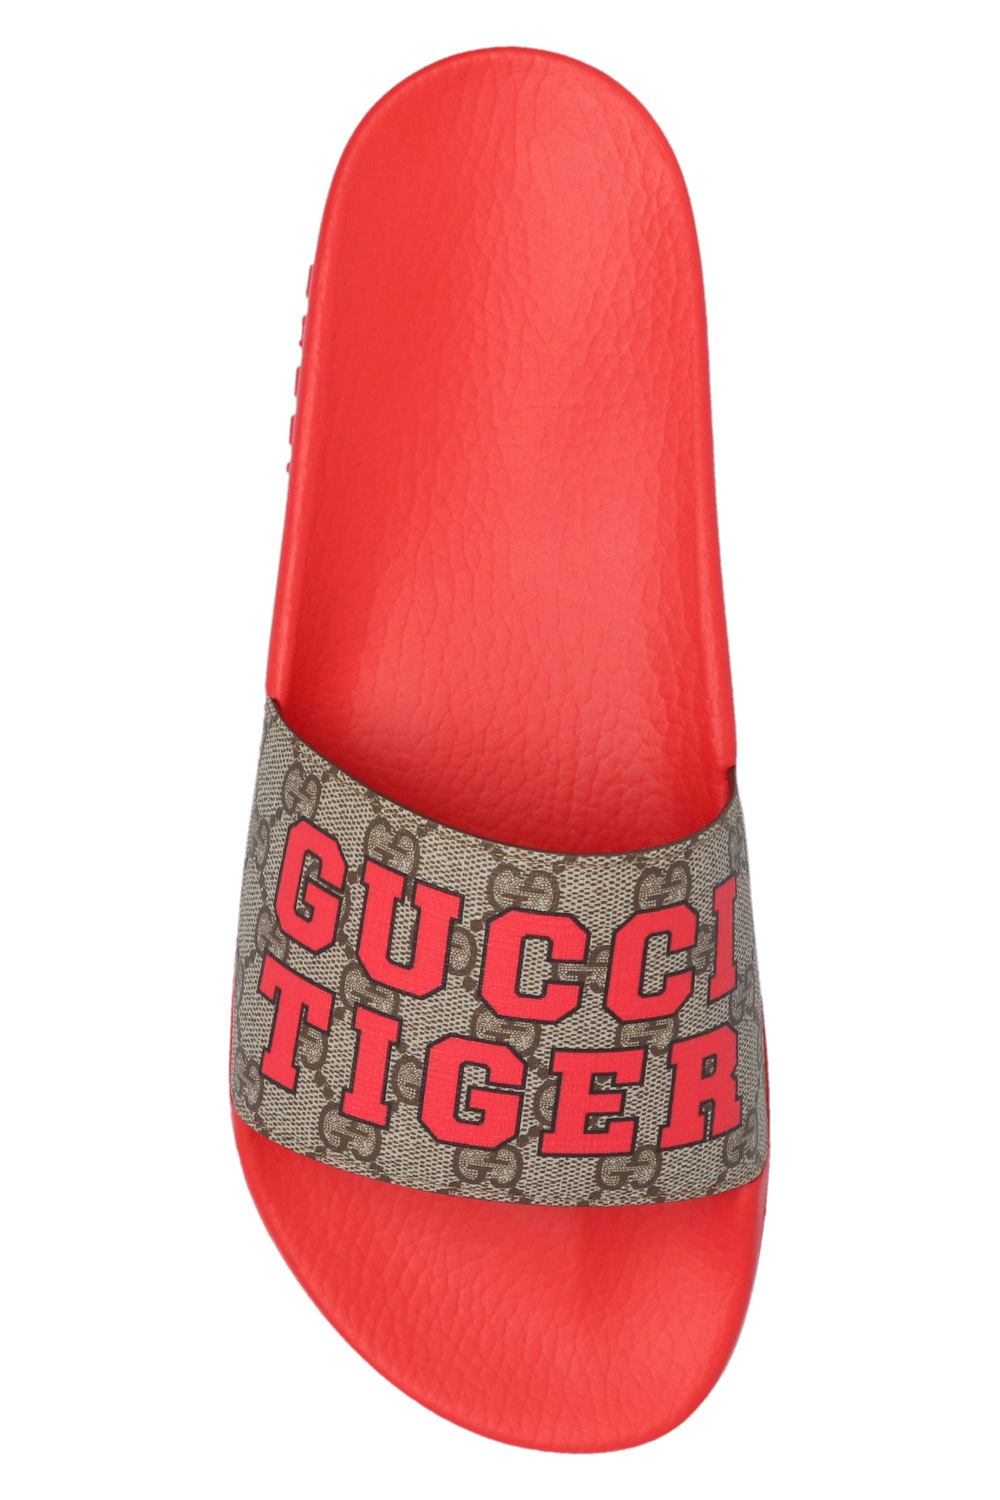 Gucci Slides from the ‘Gucci Tiger’ collection